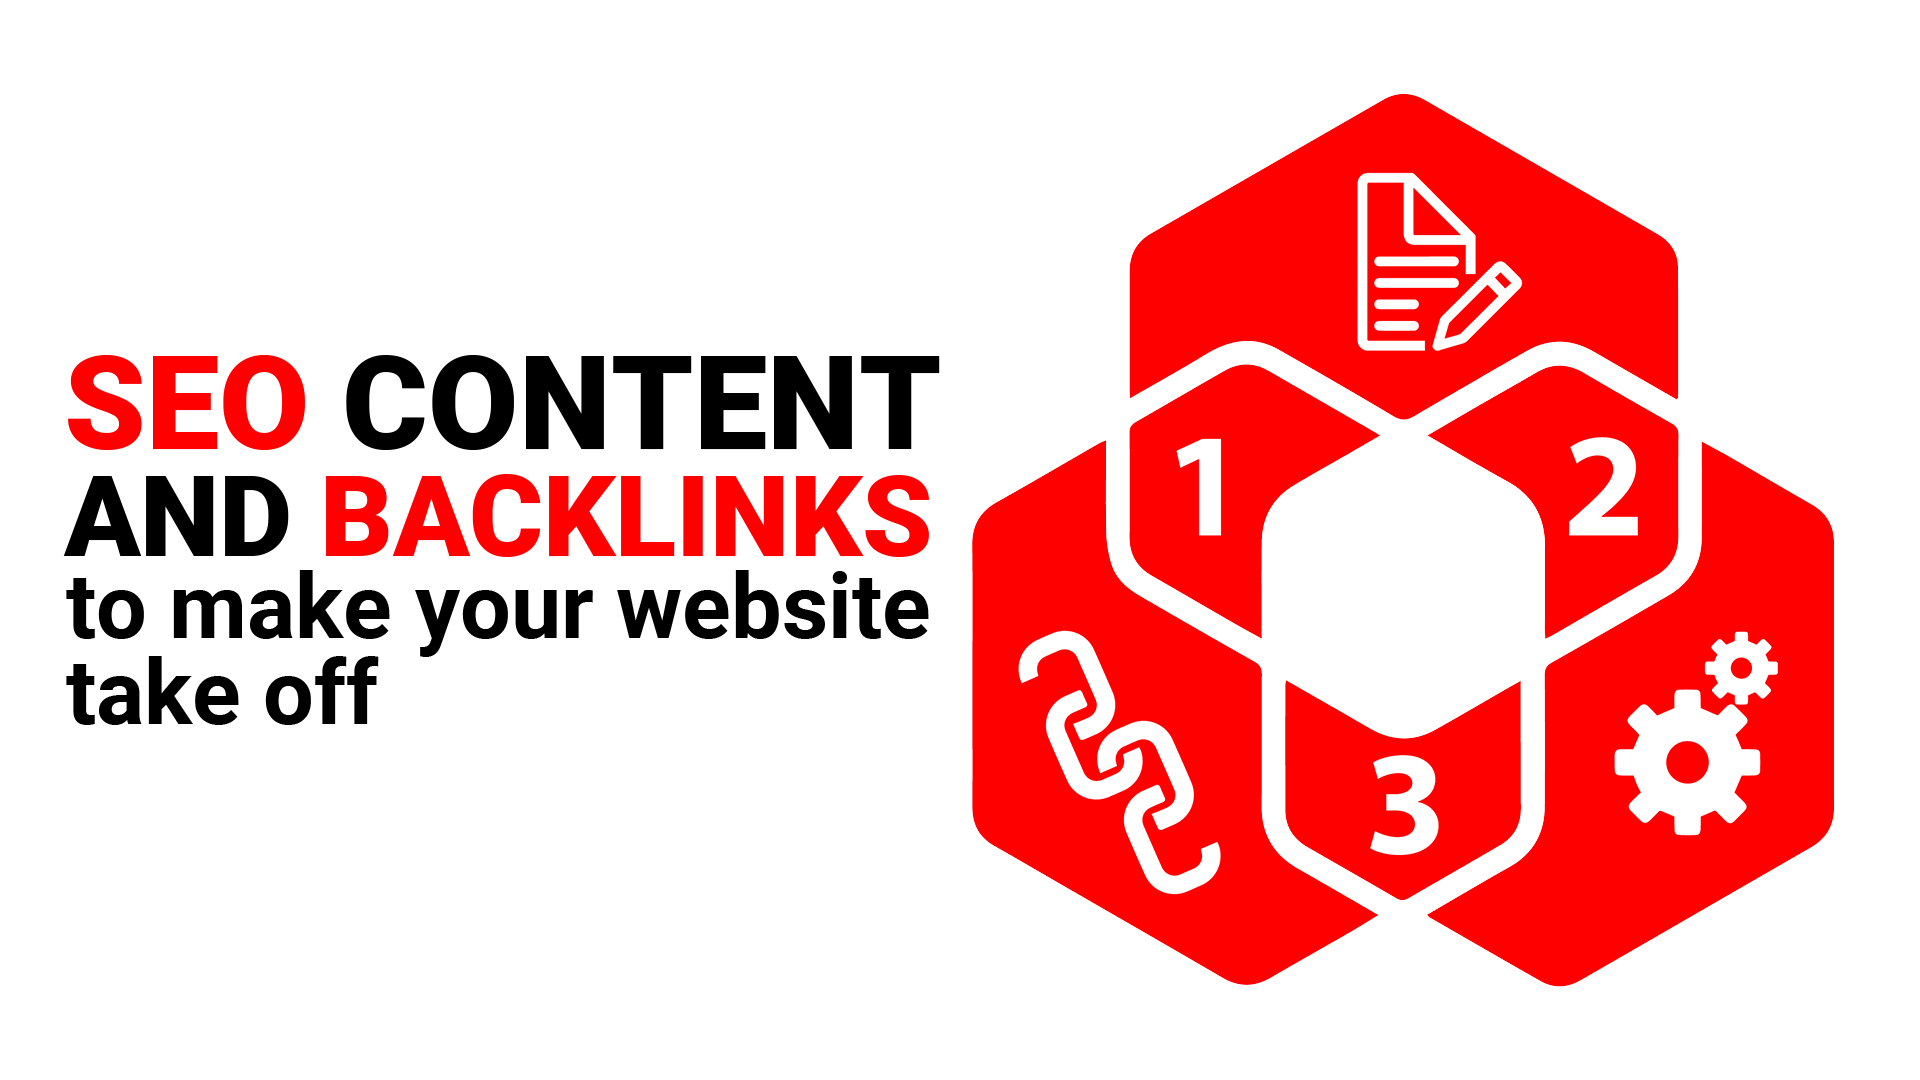 SEO Content and backlinks to make your website take off